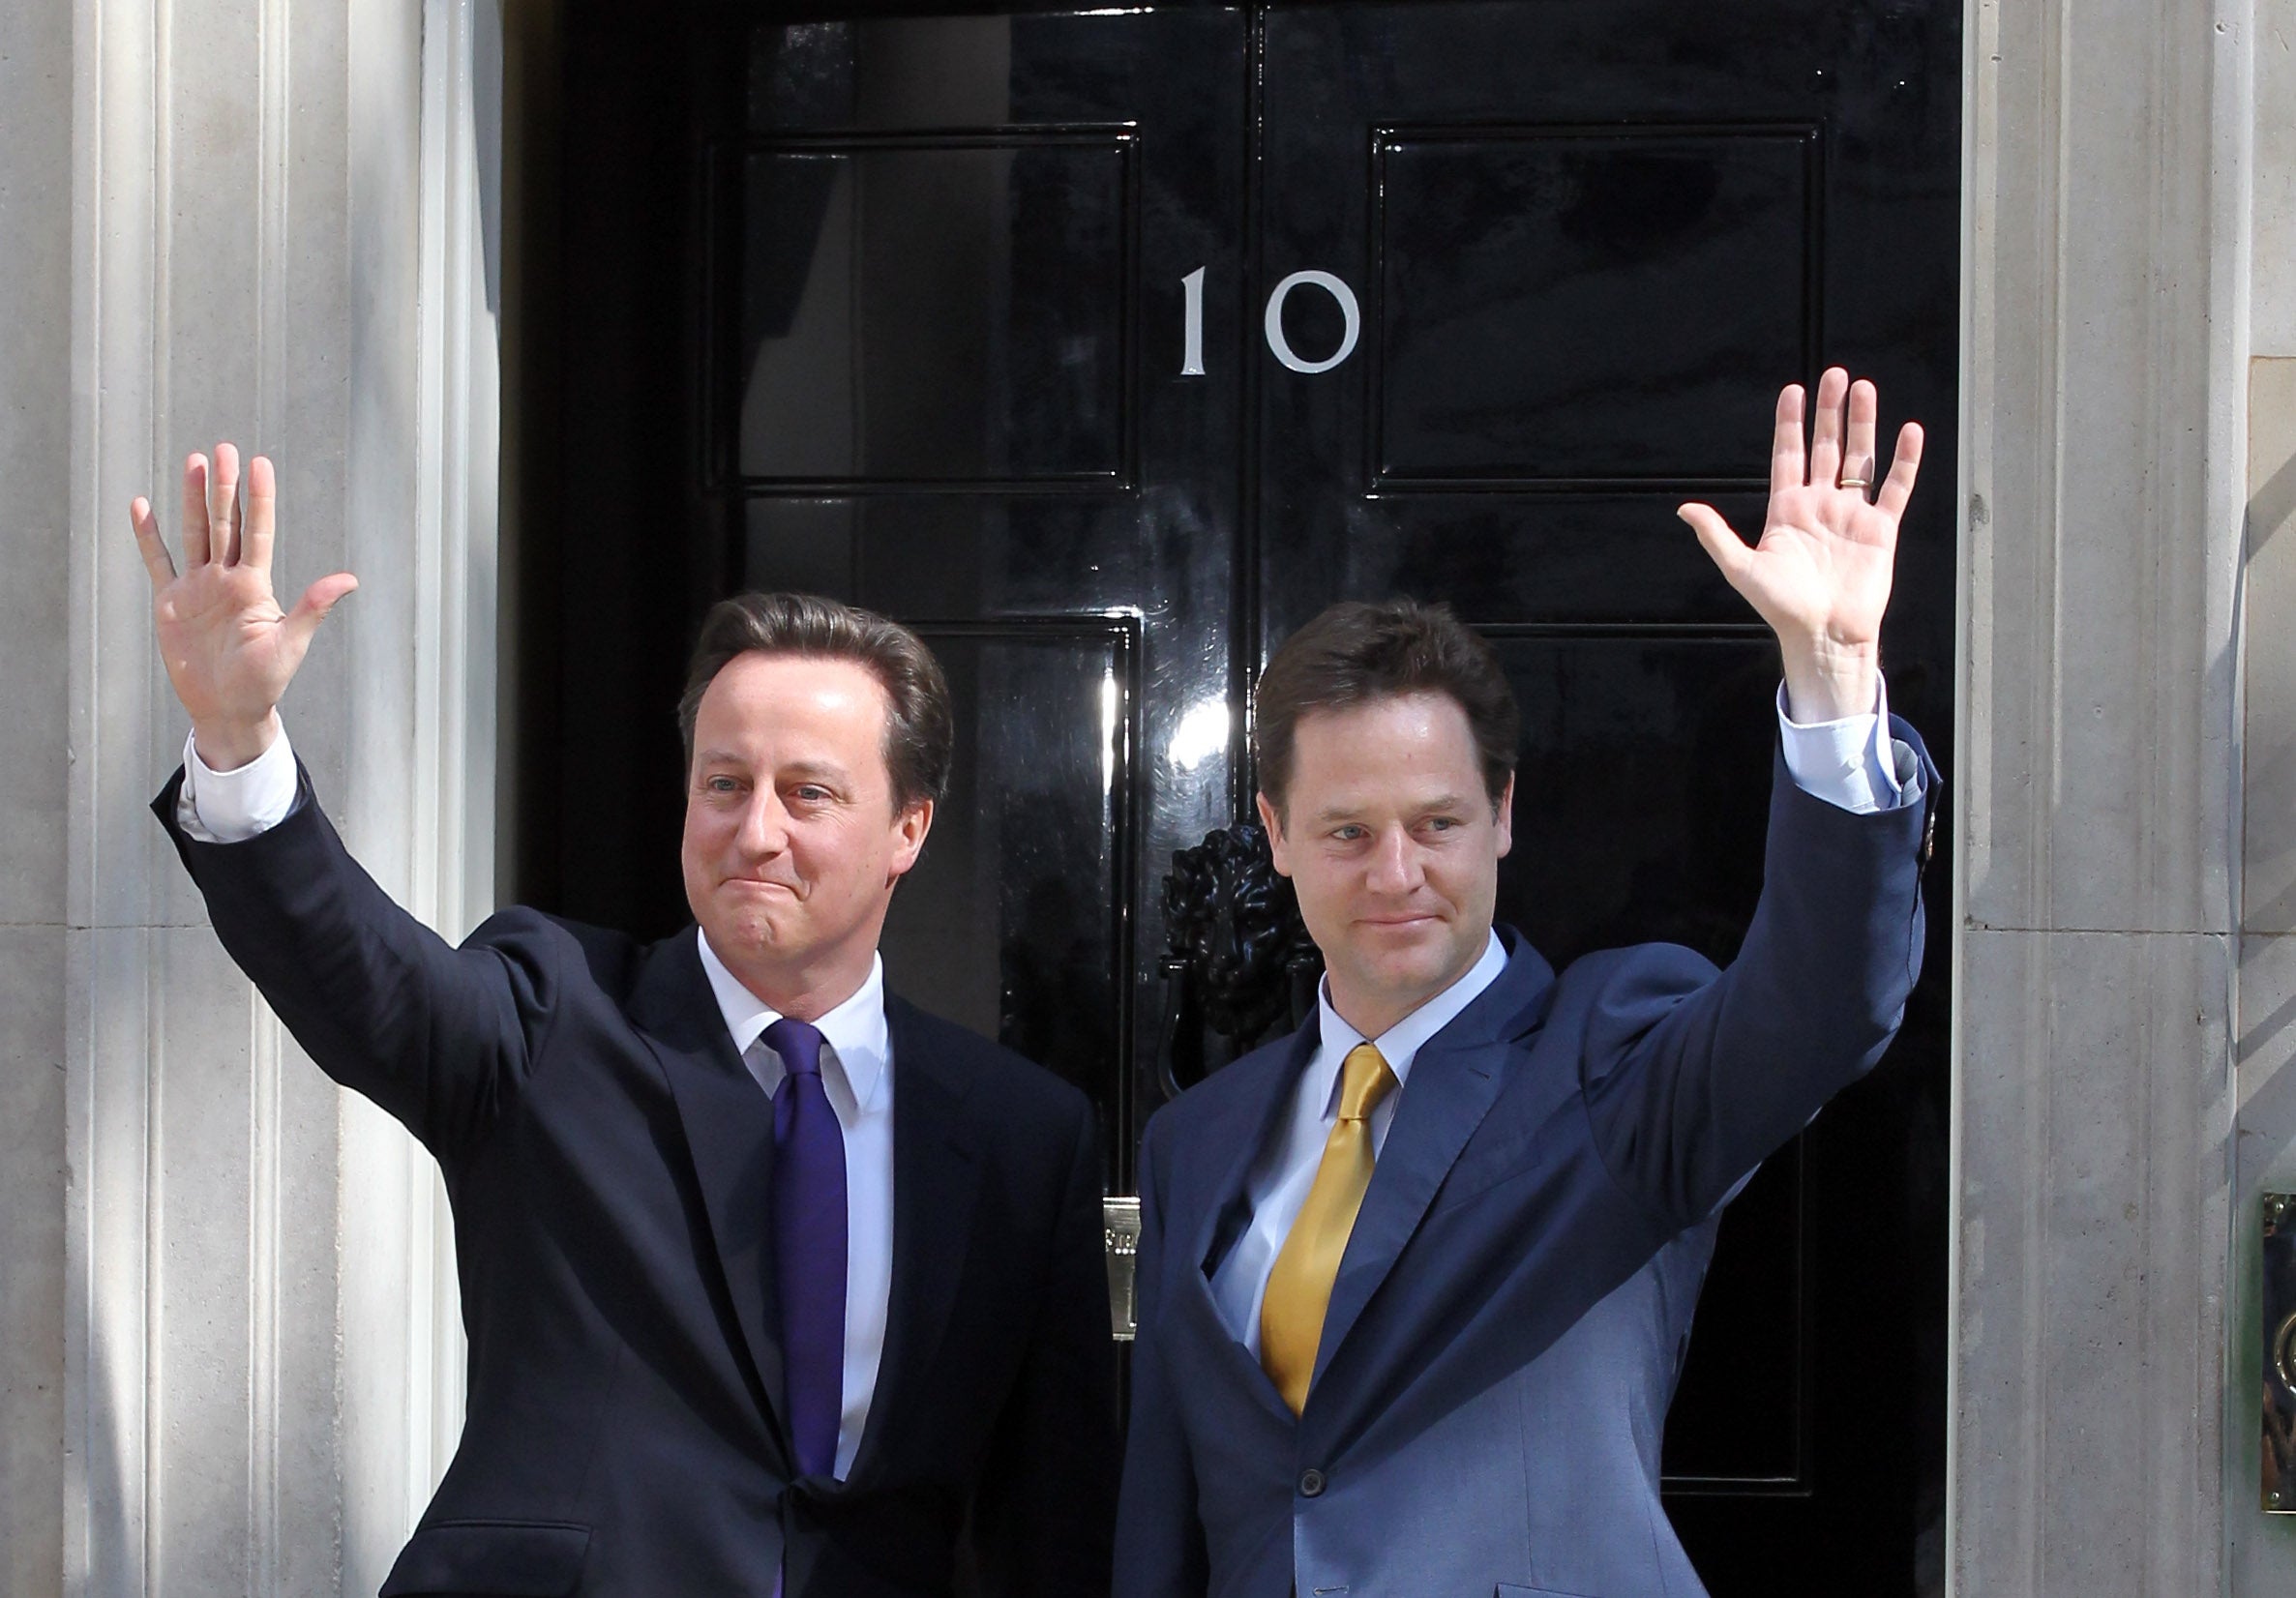 David Cameron and Nick Clegg on the first day of their coalition government in 2010